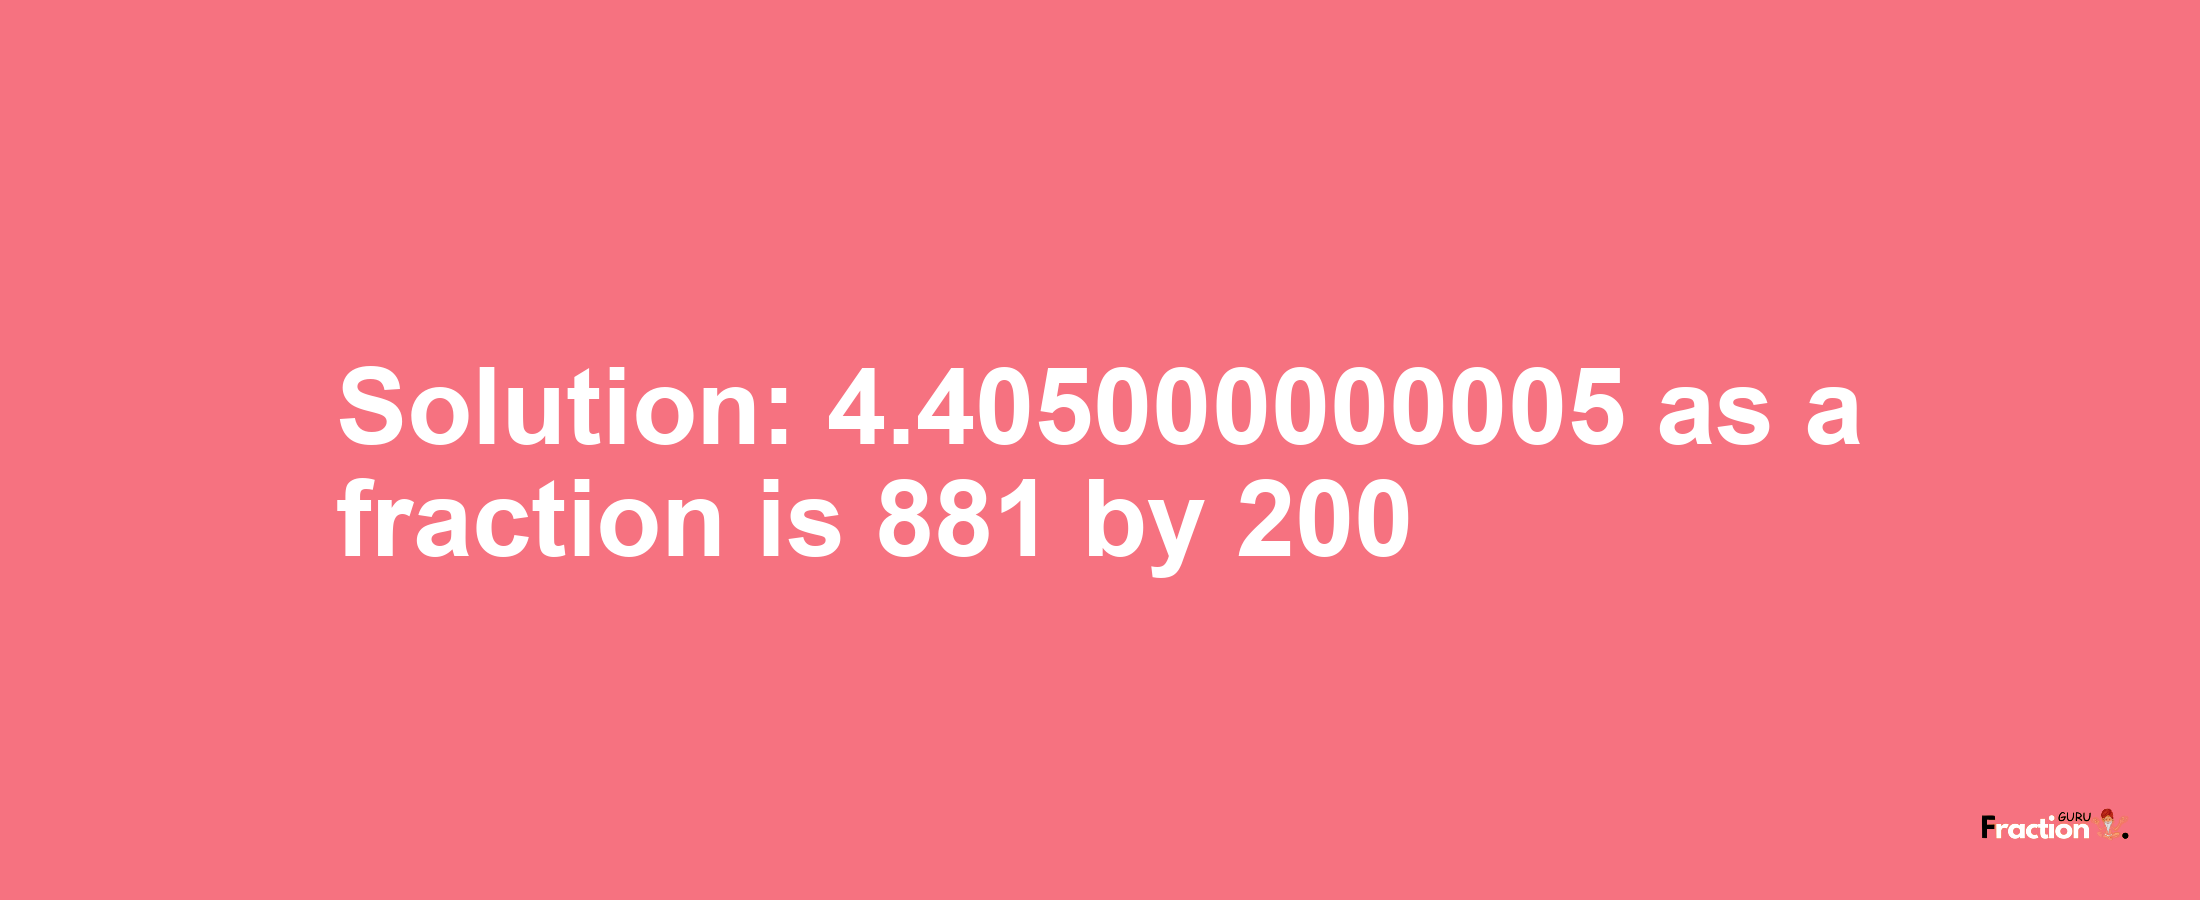 Solution:4.405000000005 as a fraction is 881/200